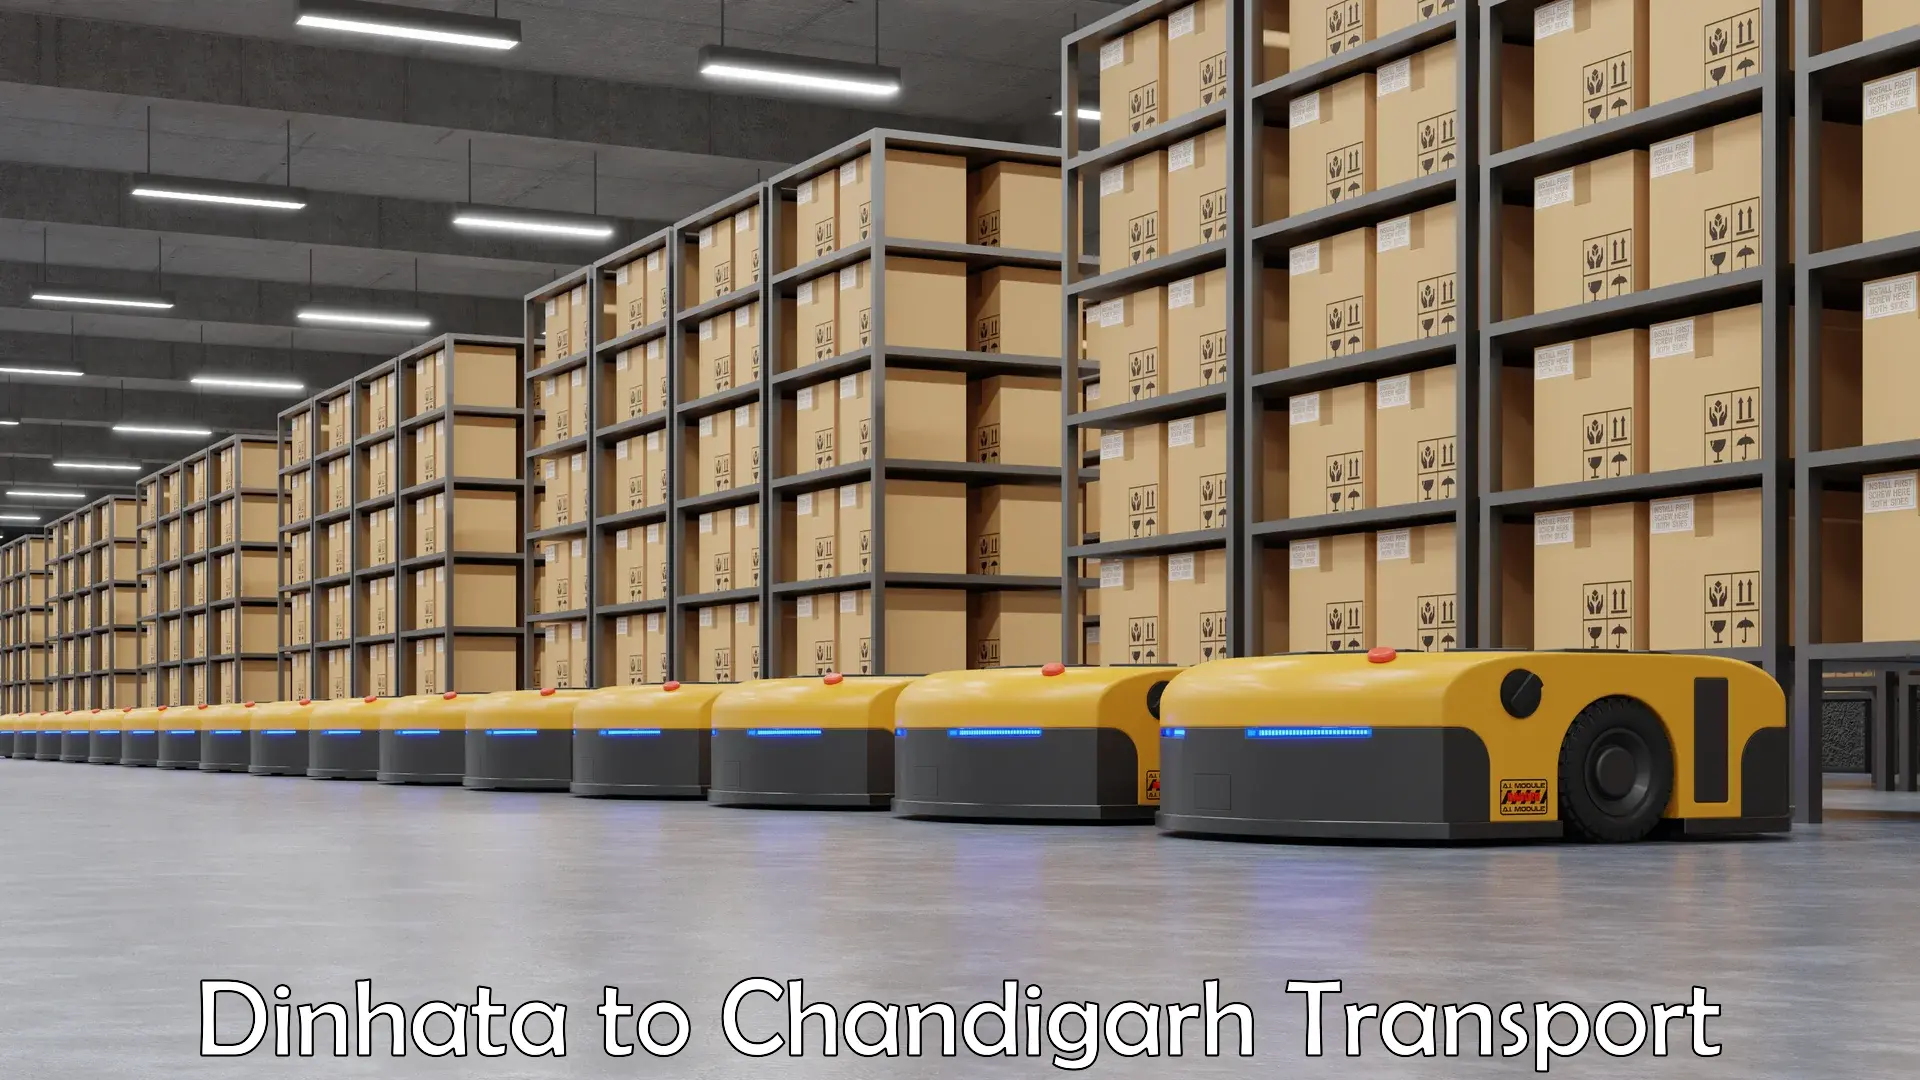 Truck transport companies in India in Dinhata to Chandigarh